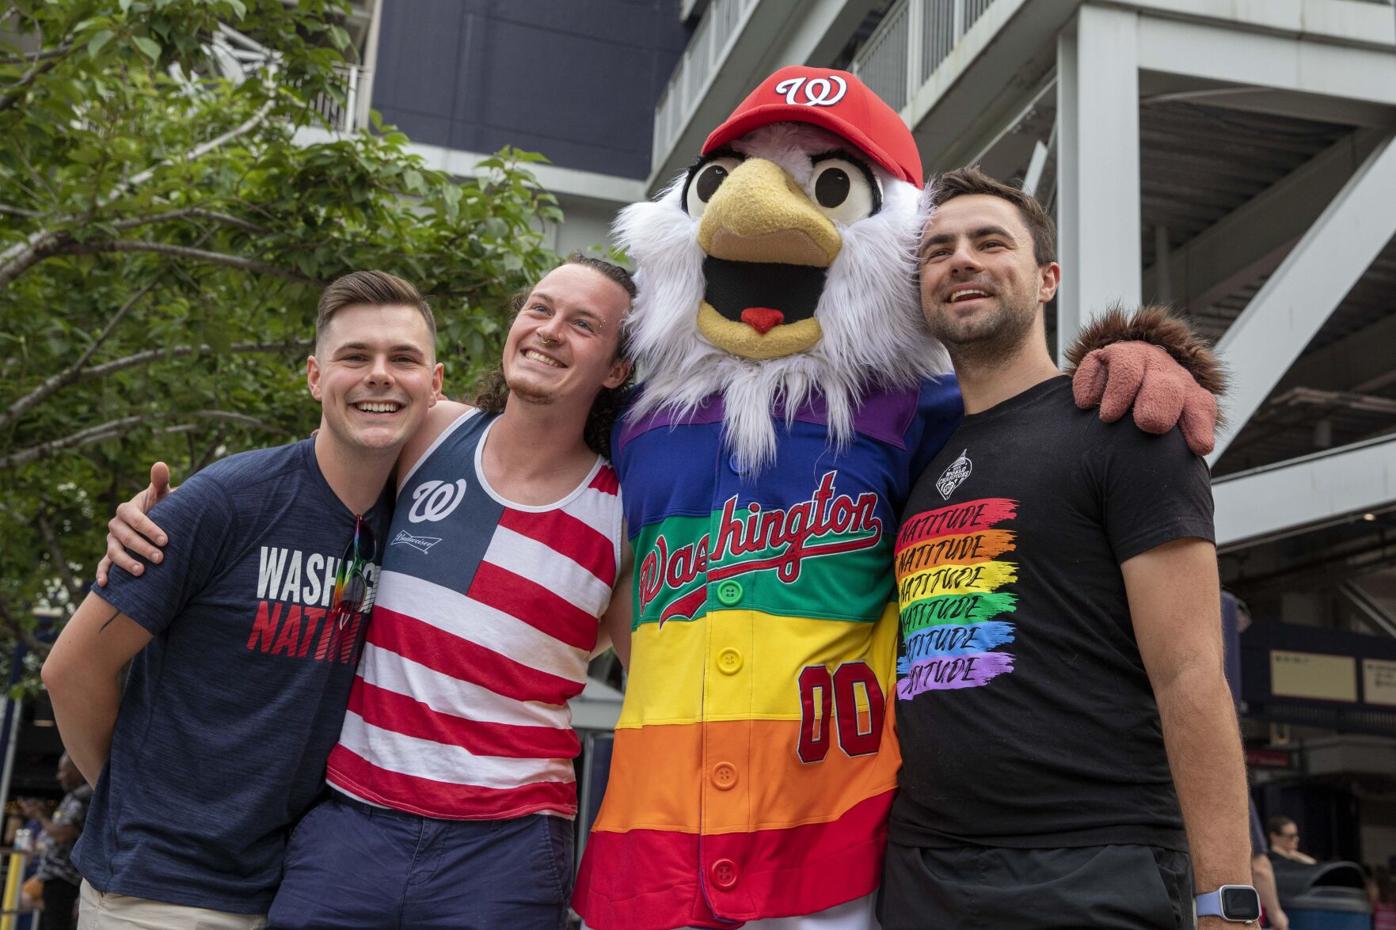 MLB leaves Pride event questions to teams, National Sports